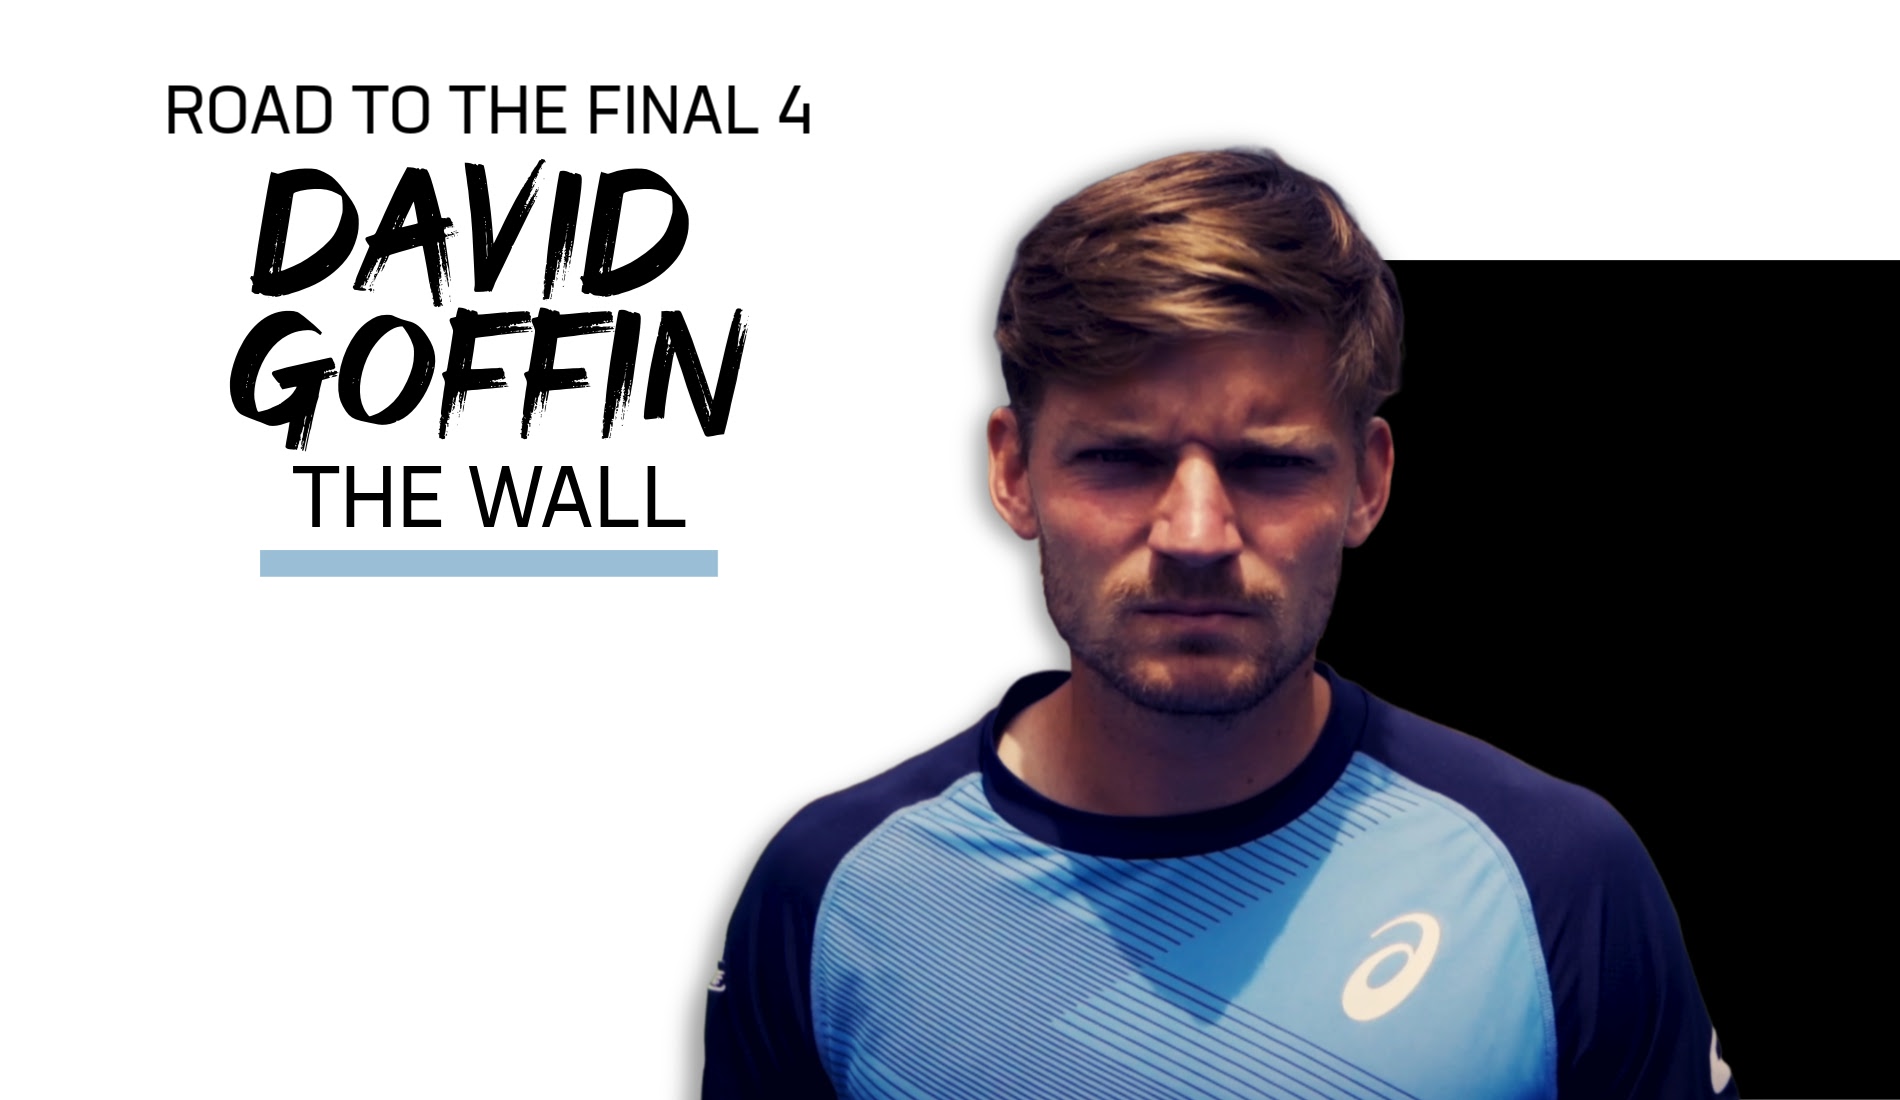 UTS1 - Road to the Final 4: David Goffin